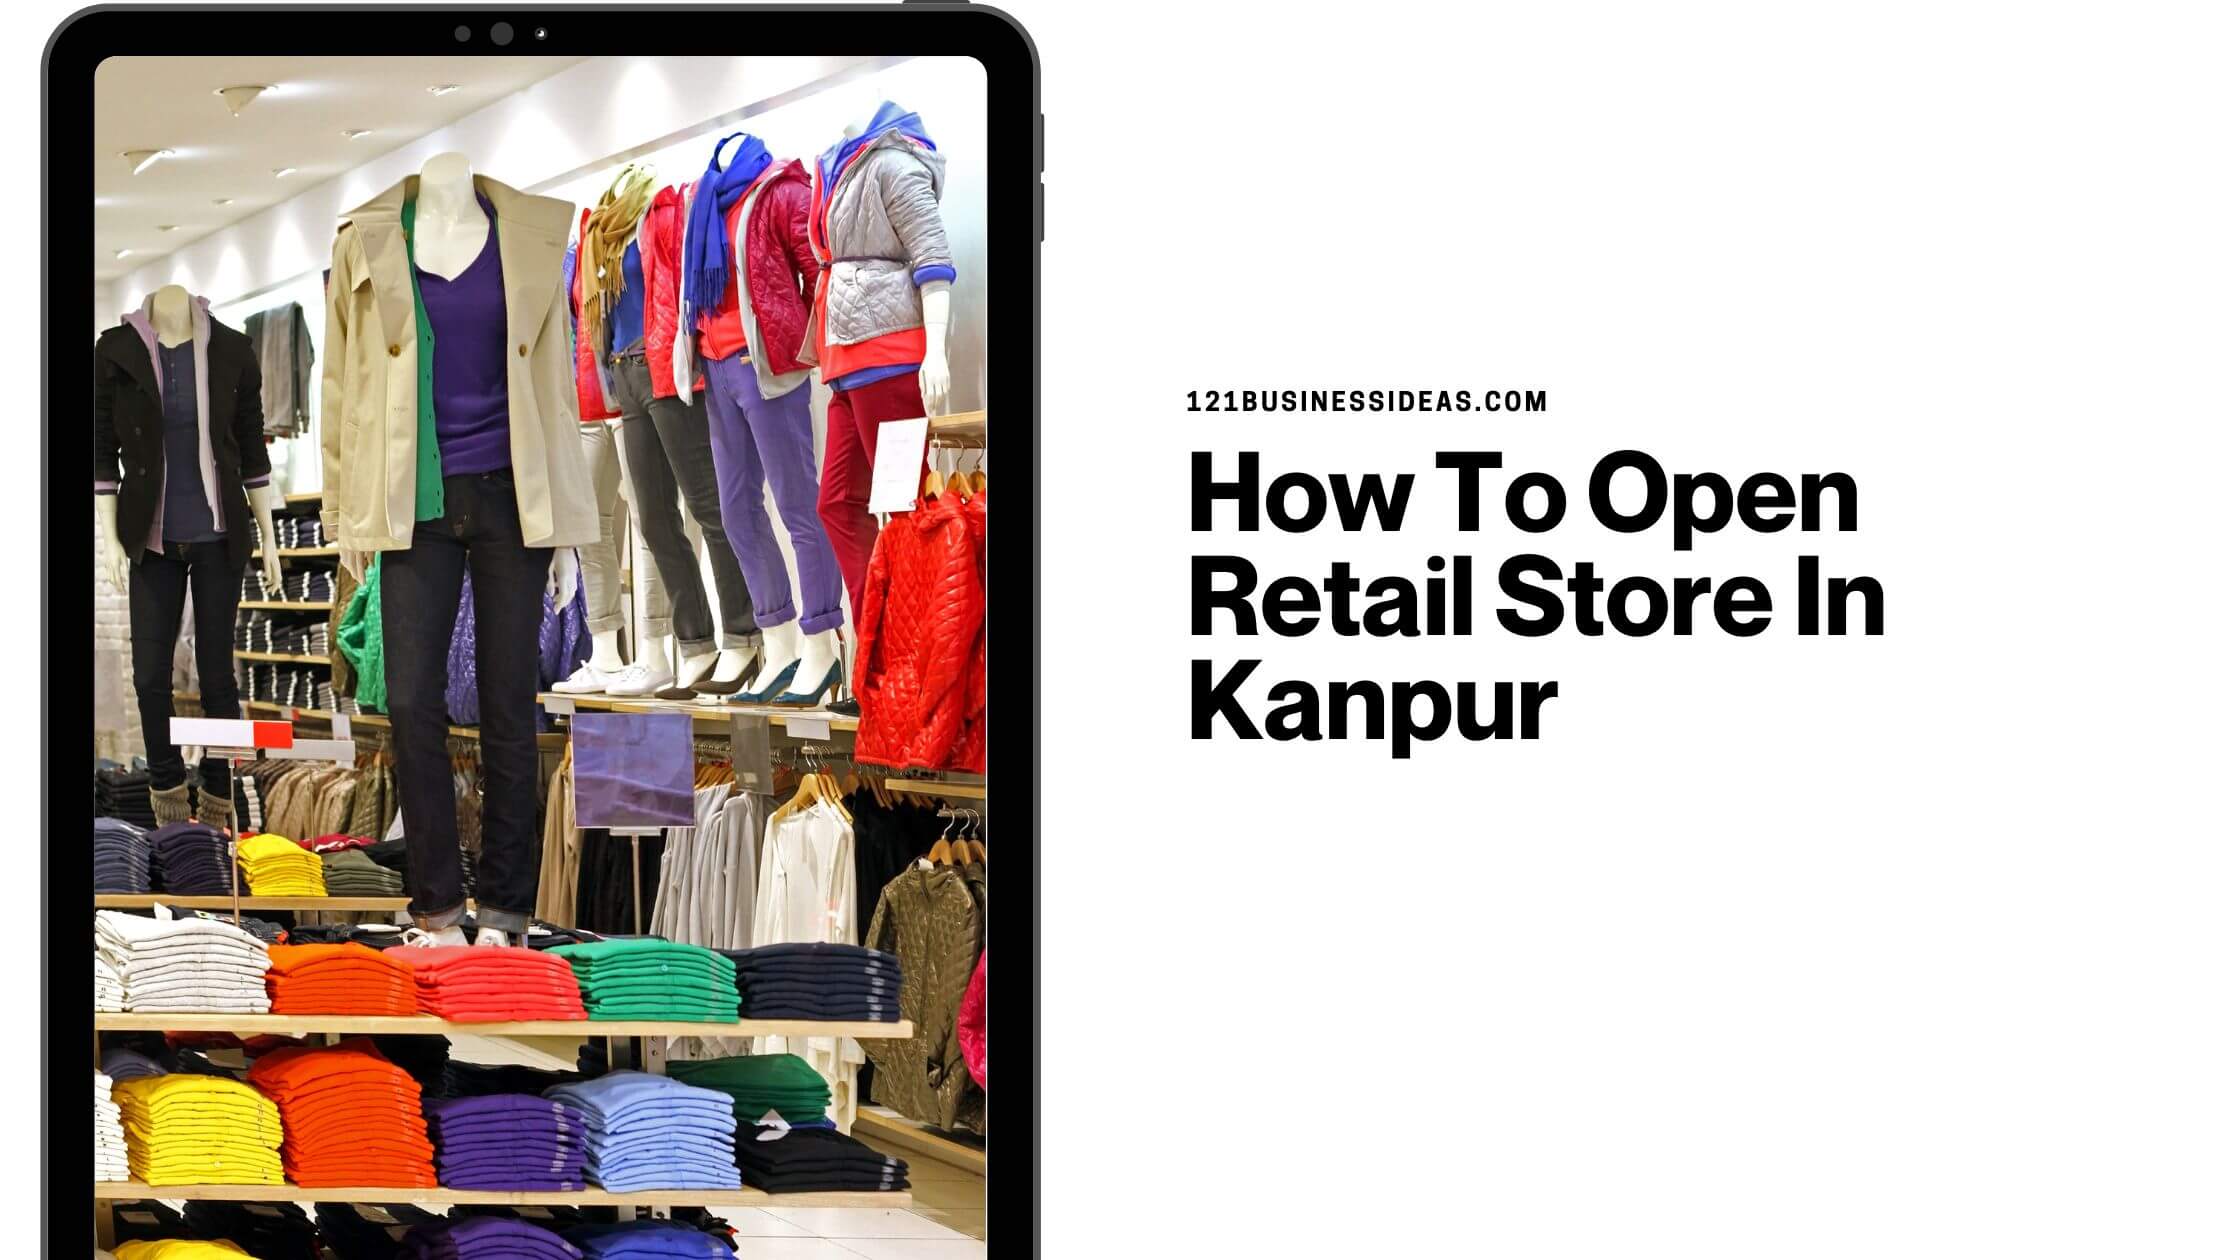 How To Open Retail Store In Kanpur (1)